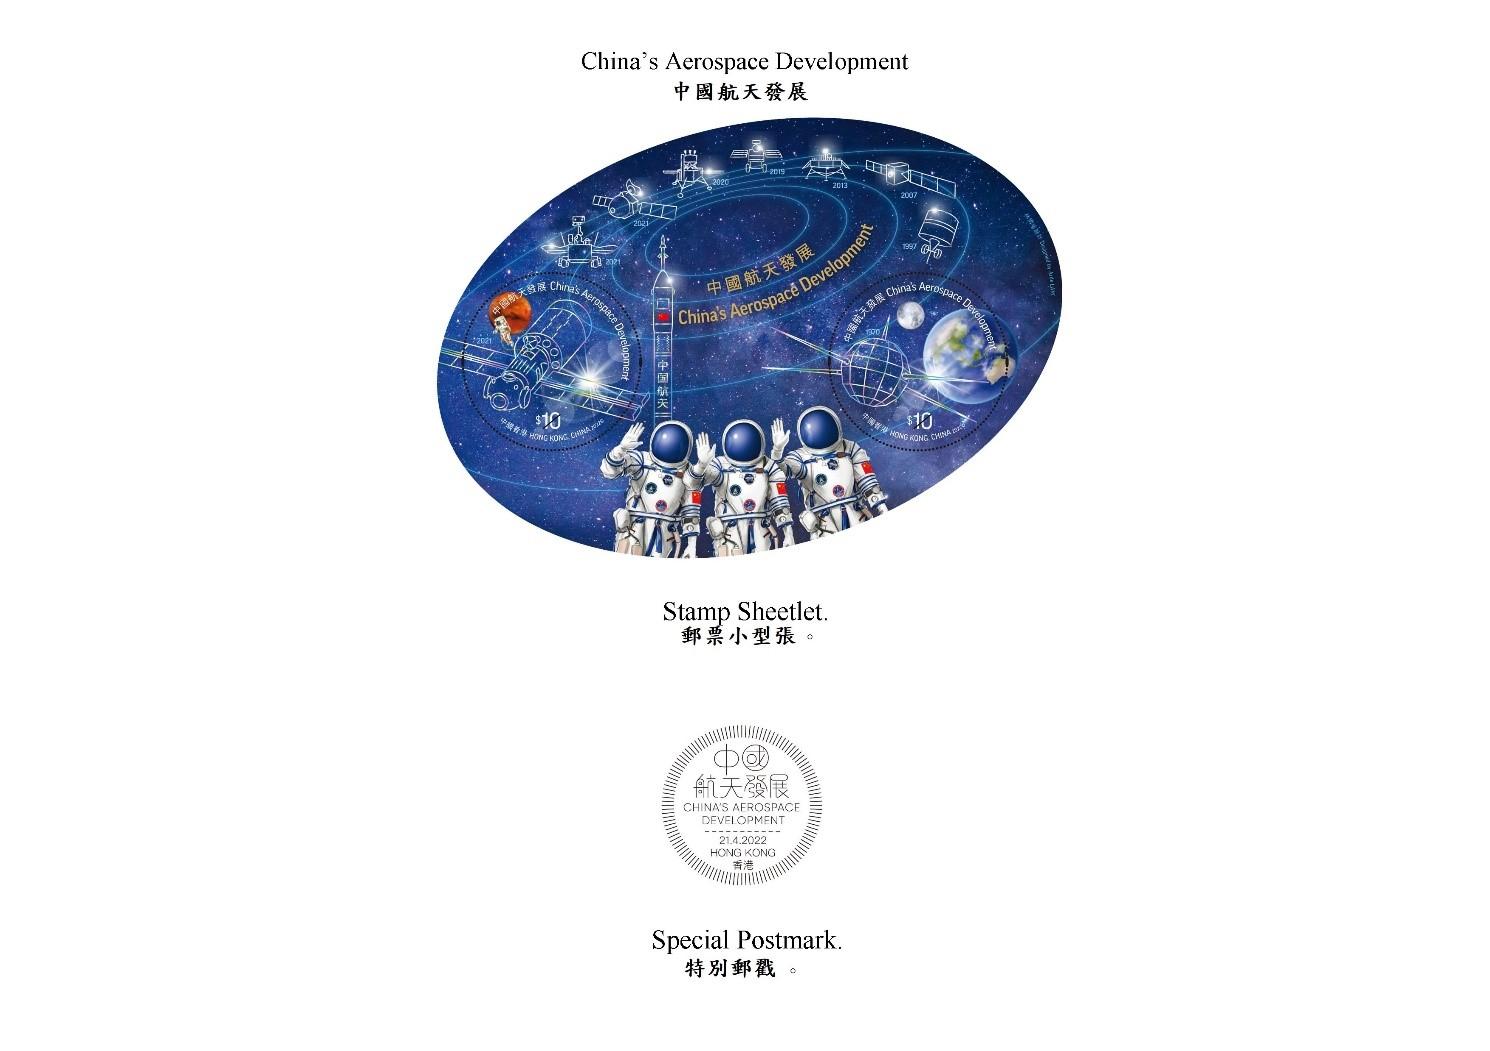 Hongkong Post will launch a special stamp issue and associated philatelic products on the theme of "China's Aerospace Development" on April 21 (Thursday). Photo shows the stamp sheetlet and the special postmark.